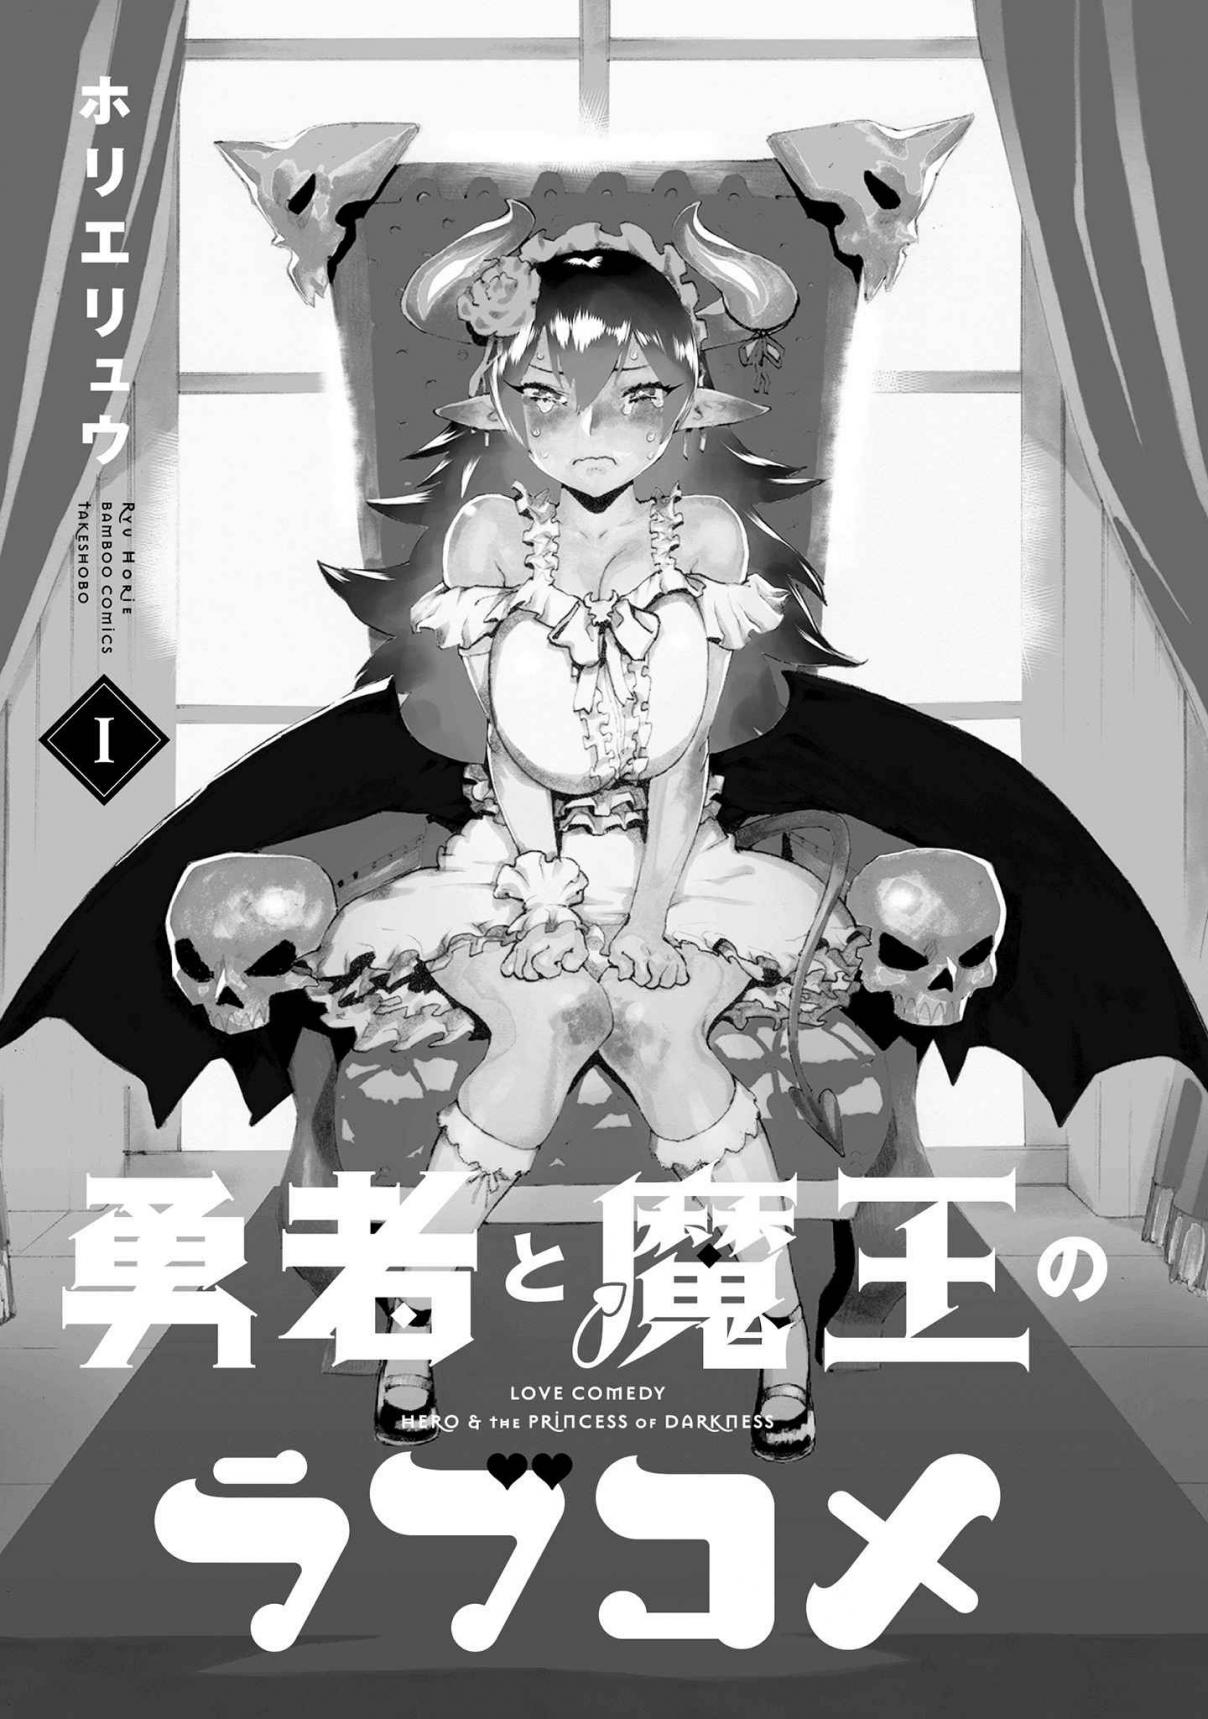 Love Comedy Hero & the Princess of Darkness Ch. 9.2 Volume 1 Extras